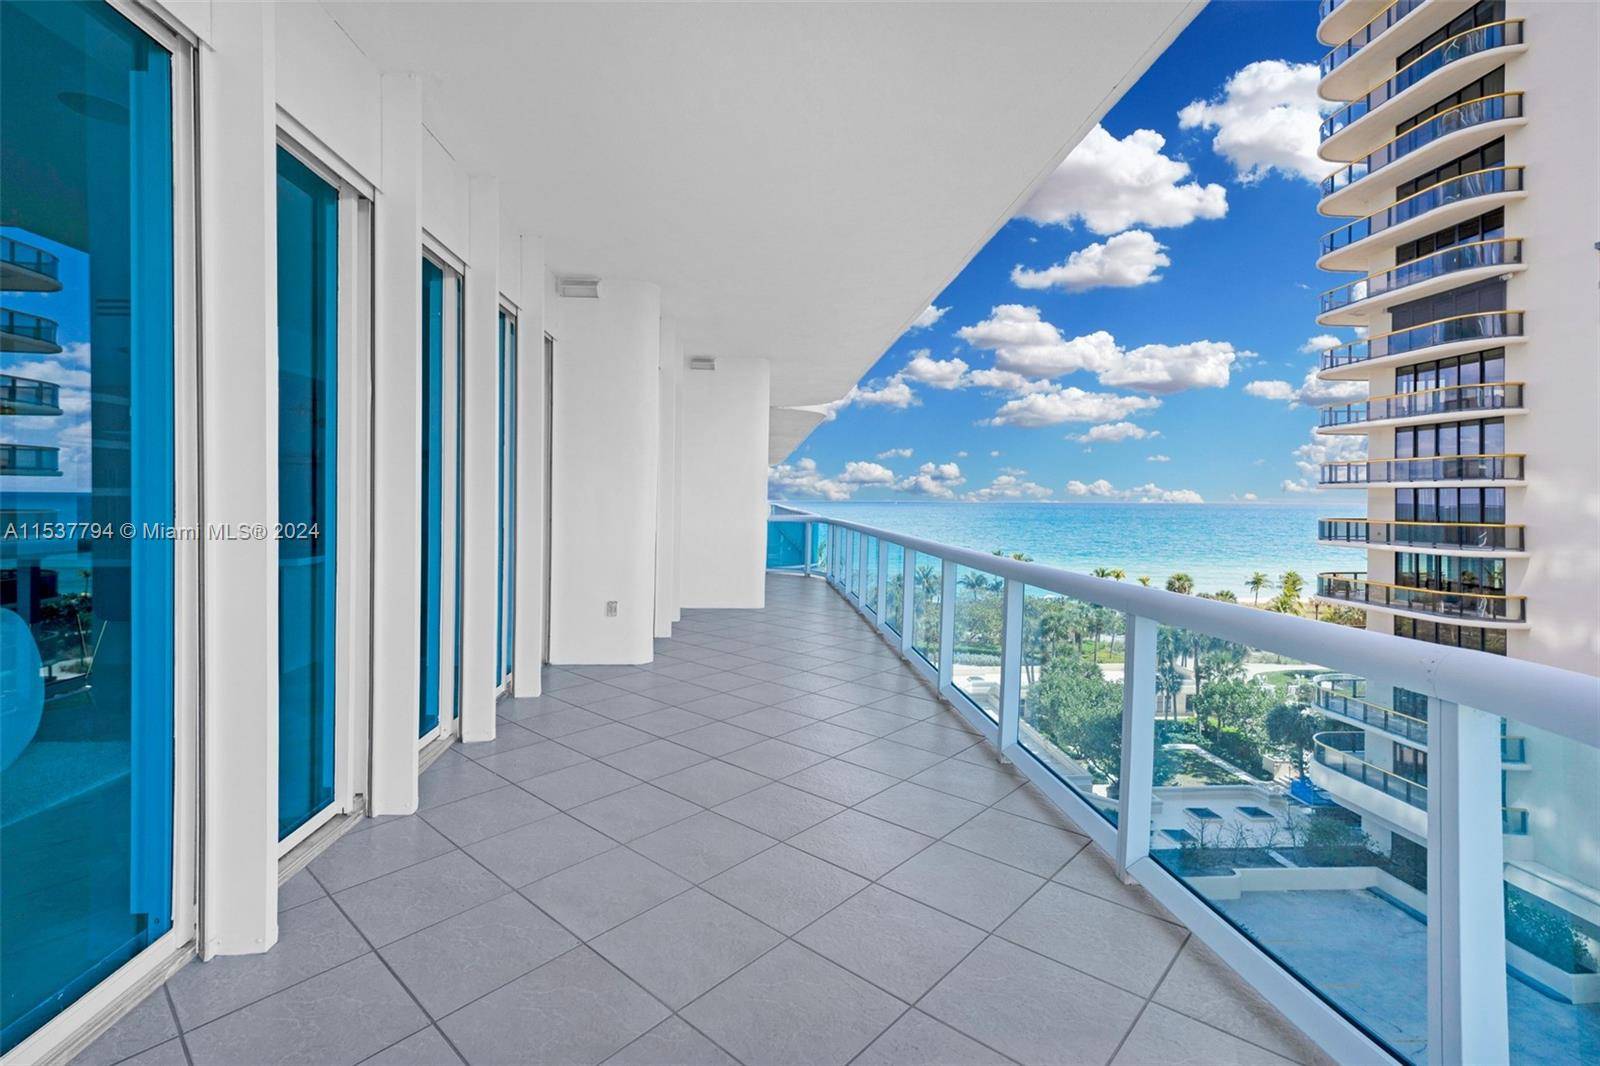 IMPECCABLY and TOTALLY RENOVATED BY A RENOWNED DESIGNER, this spacious home in the sky features a private elevator with a foyer entrance.